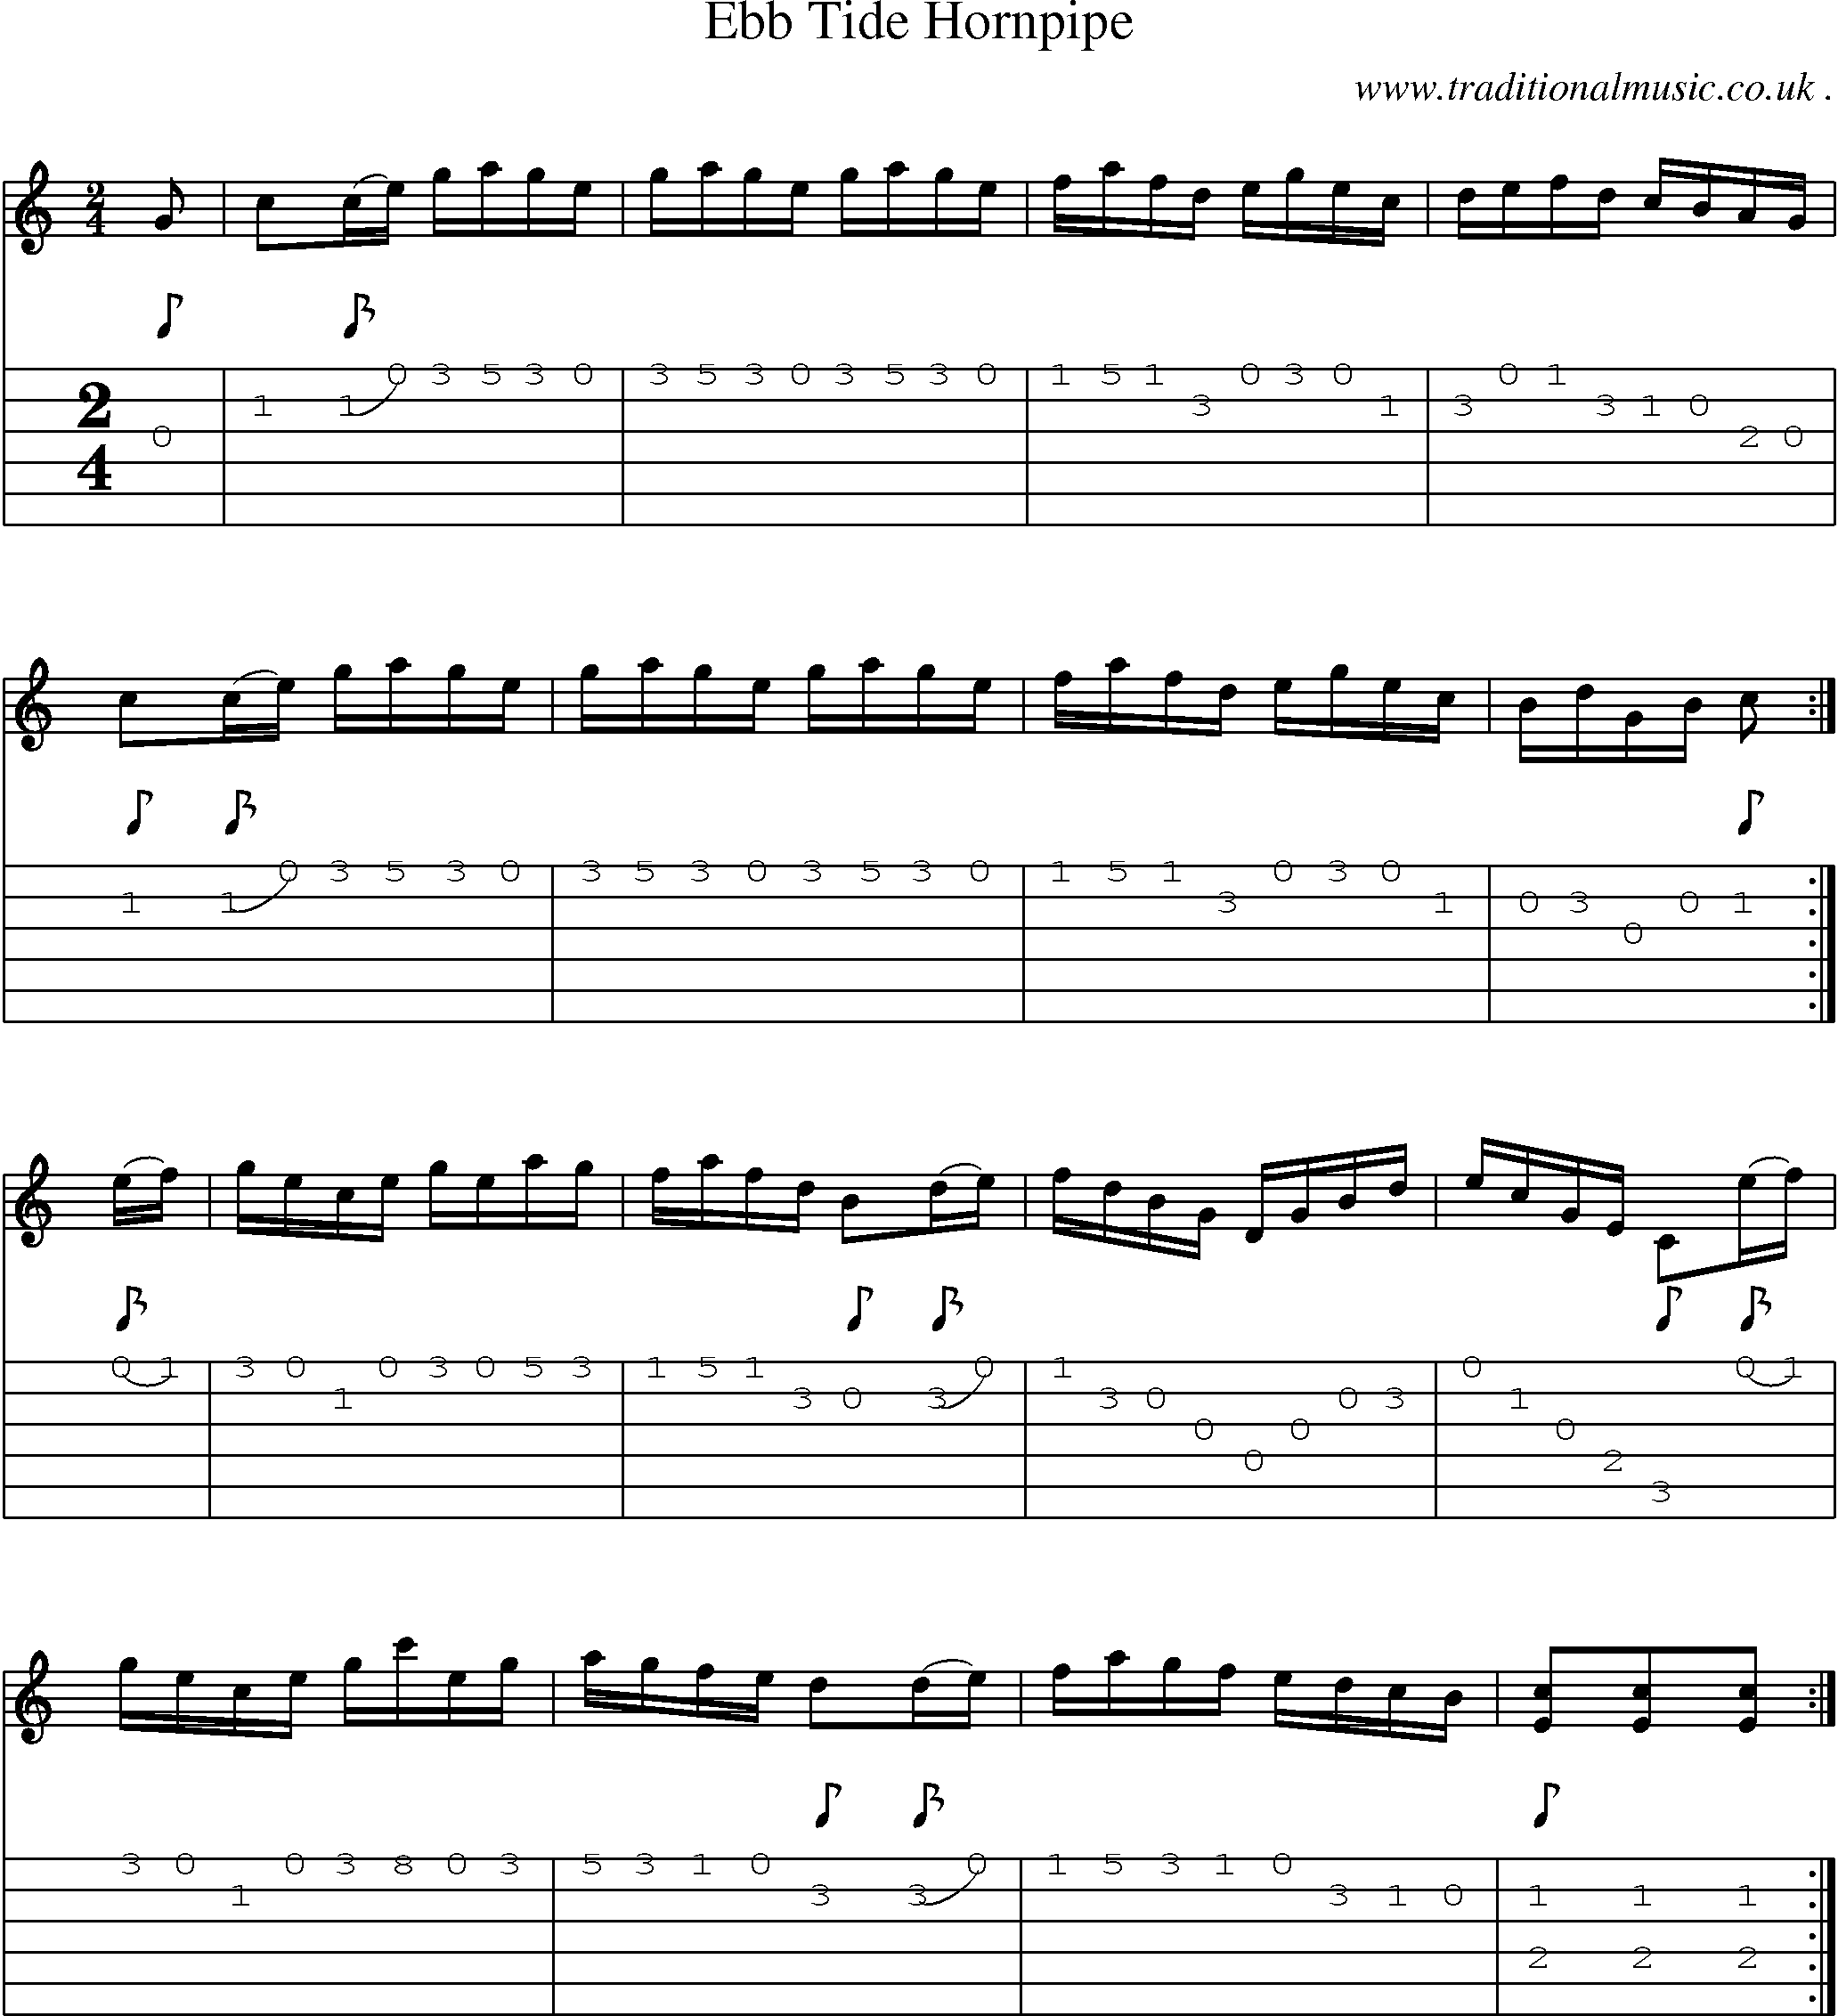 Sheet-Music and Guitar Tabs for Ebb Tide Hornpipe